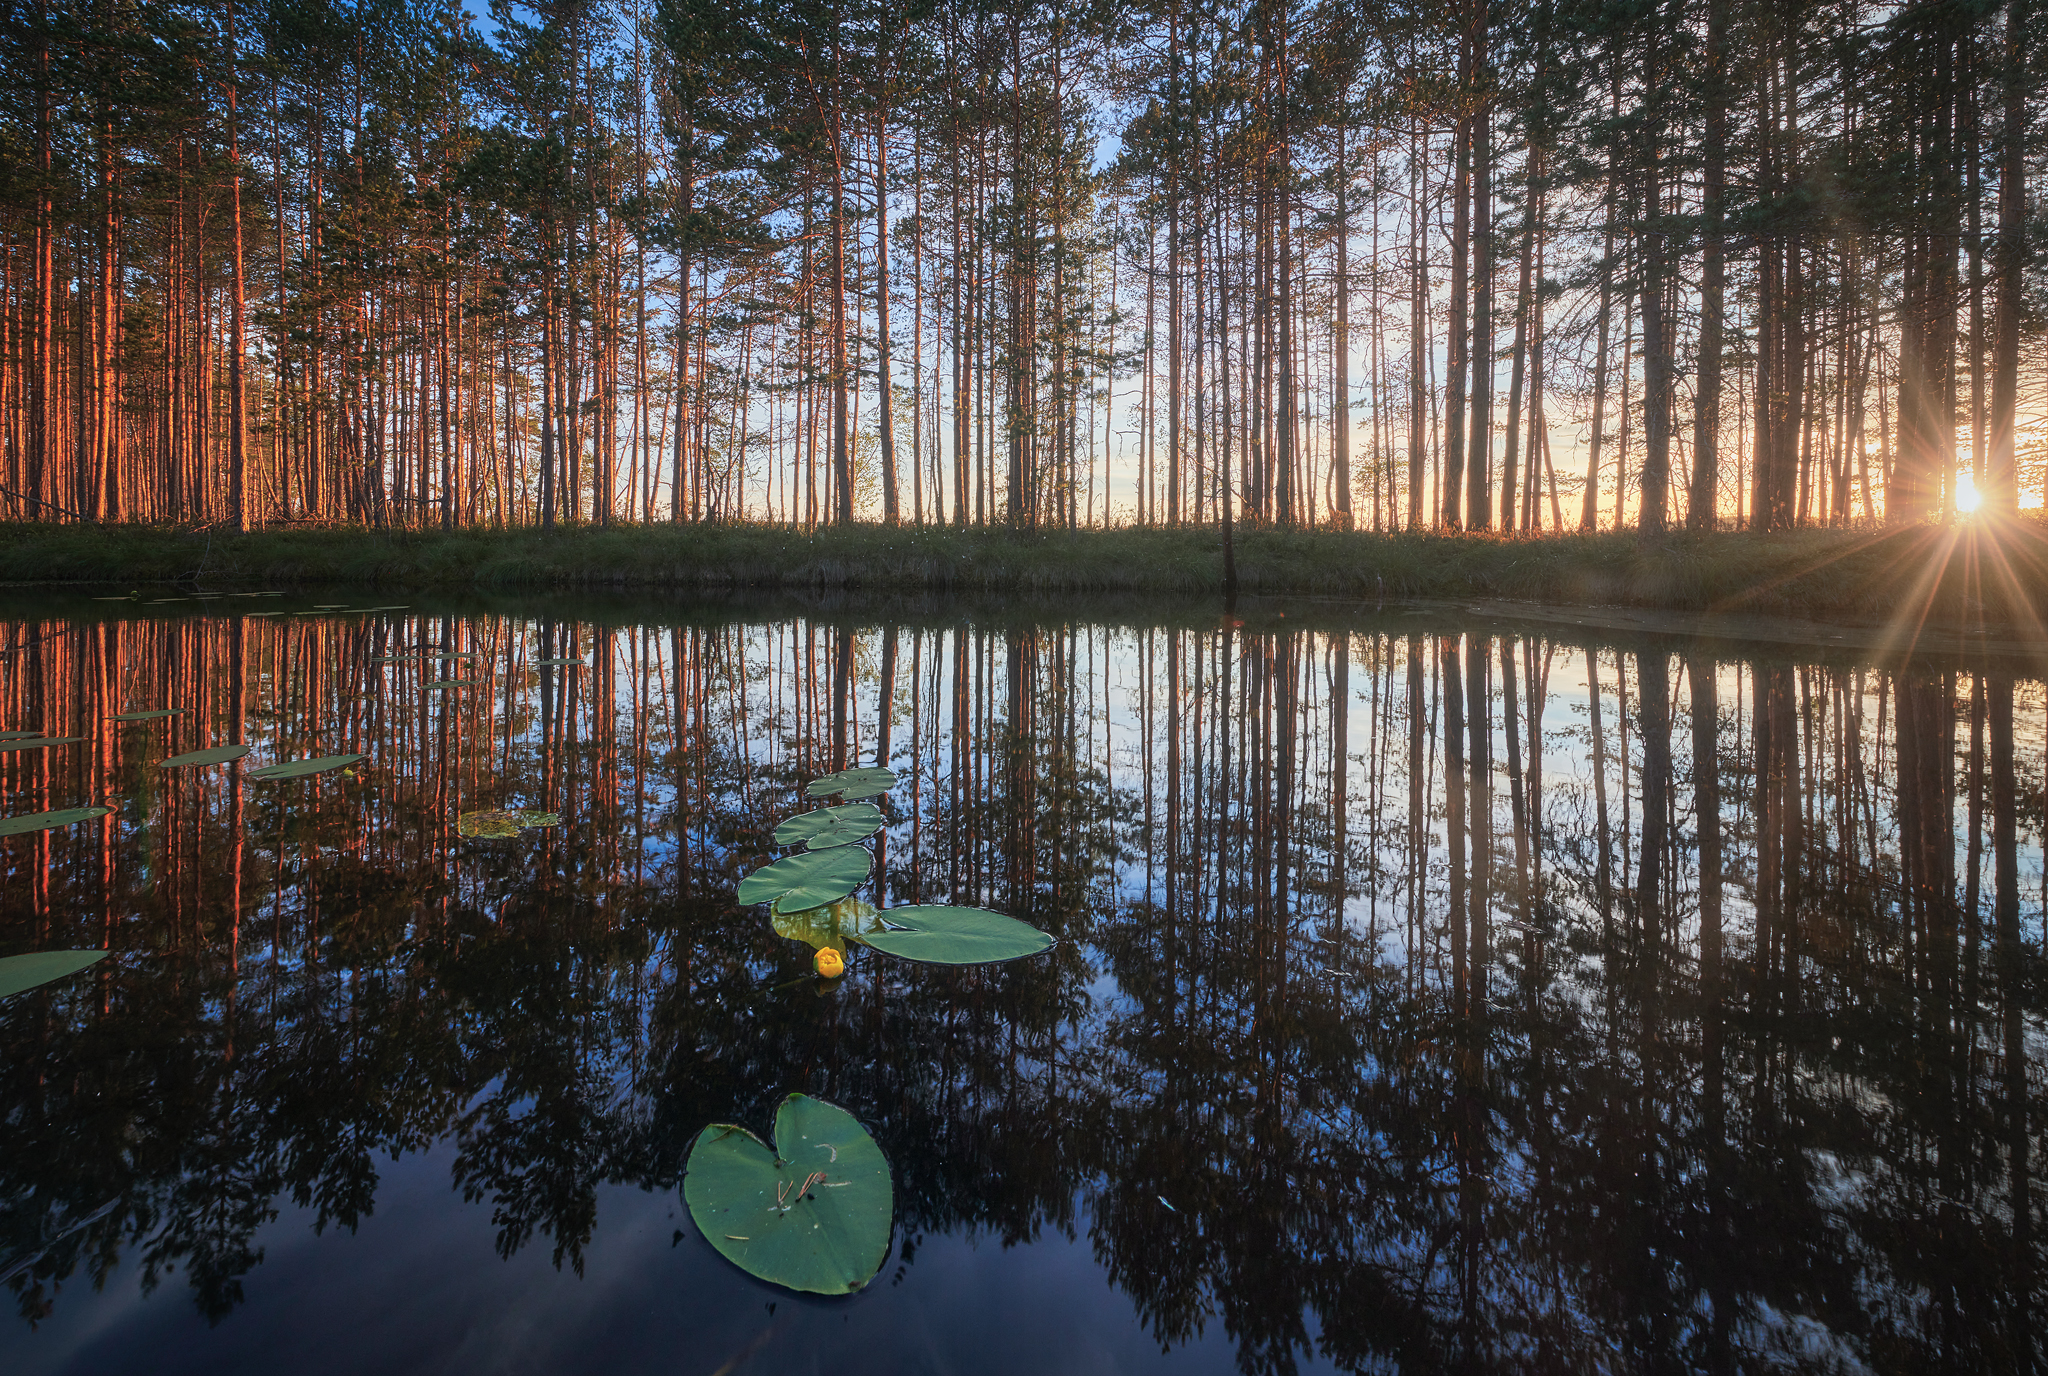 General 2048x1376 water water lilies nature trees sunlight sunset reflection photography outdoors Anton Kononov